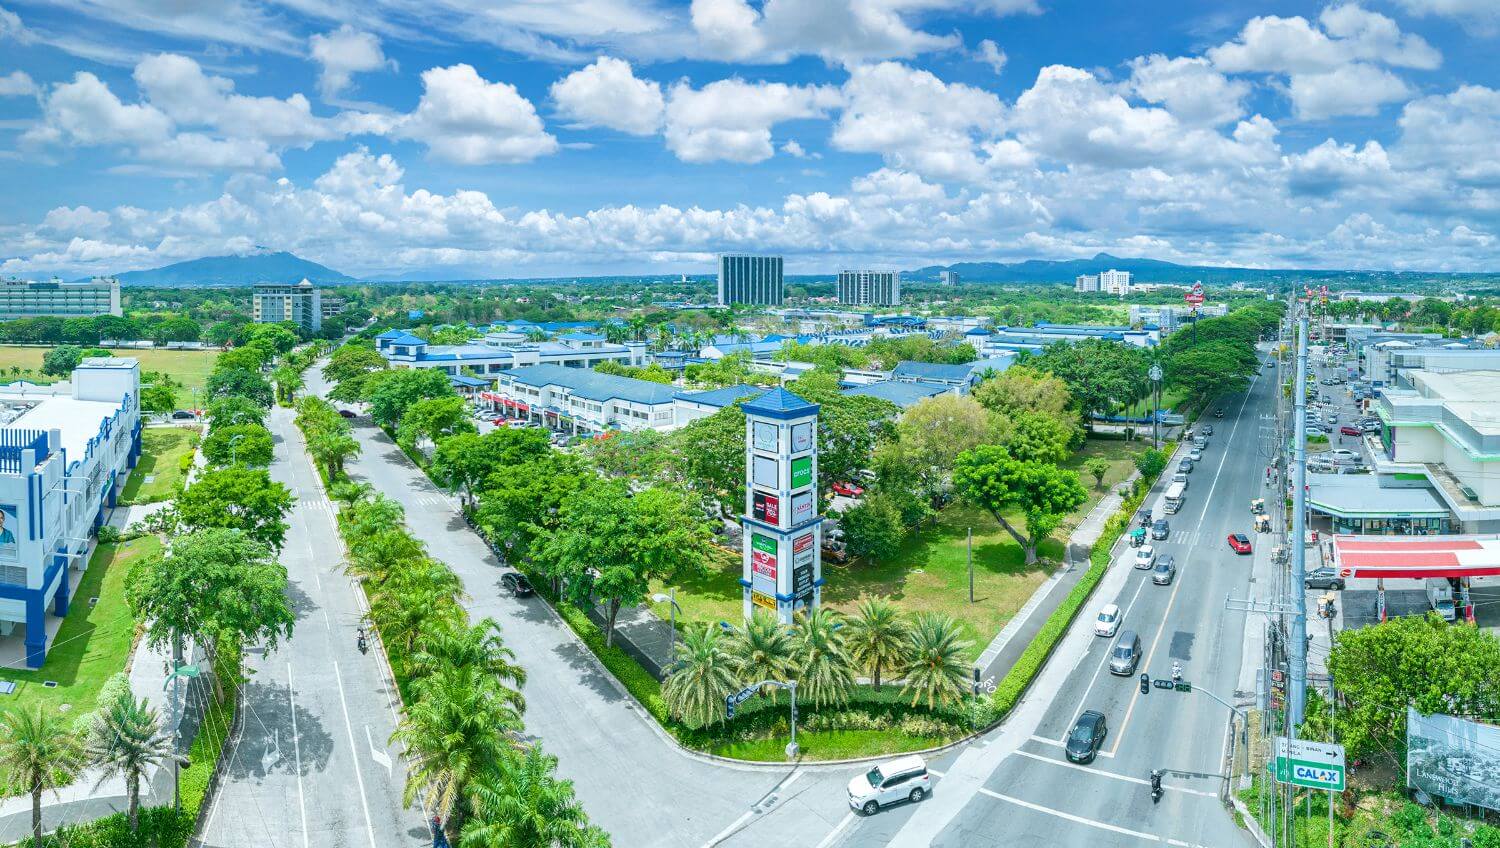 In a landscape where developers prioritized maximizing spaces, Greenfield City in Sta. Rosa